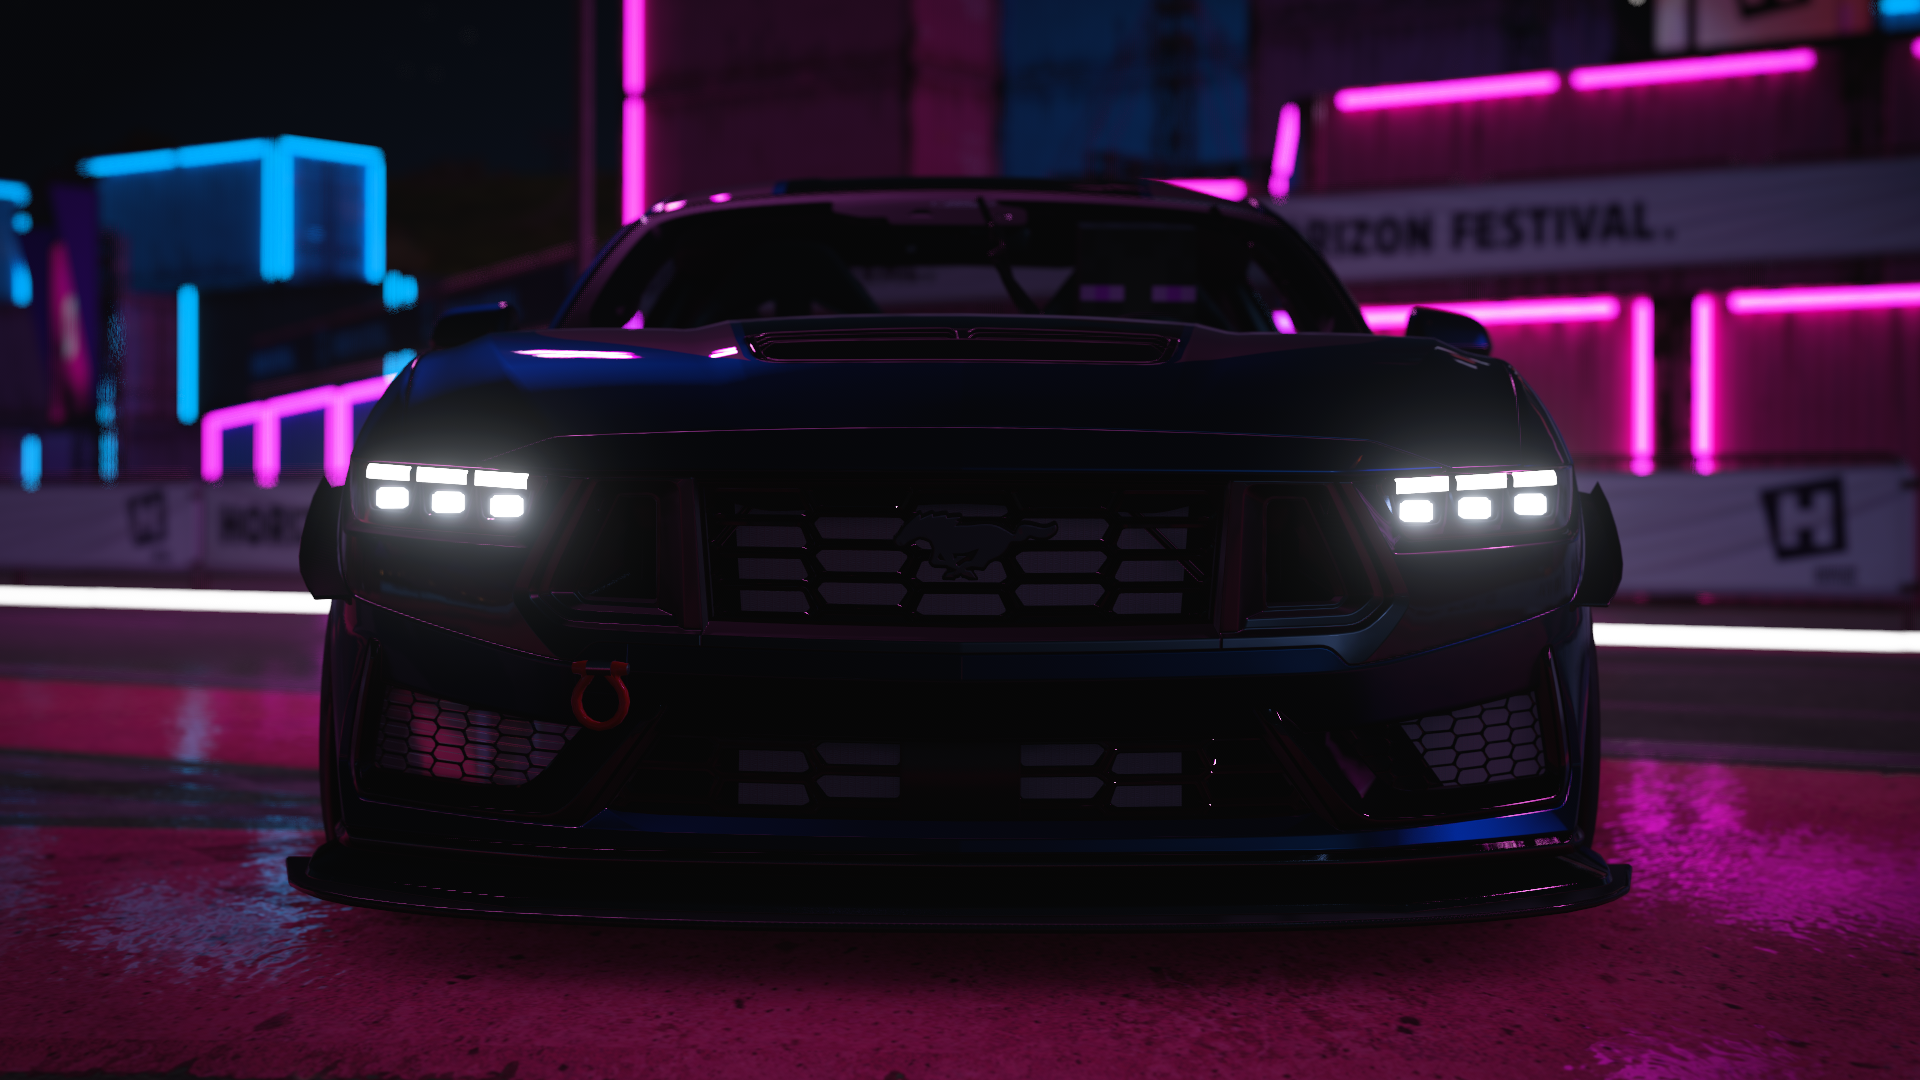 2025 Ford Mustang Dark Horse Forza Horizon 5 Car Neon Reflection Video Games Ford V8 Engine Muscle C 1920x1080